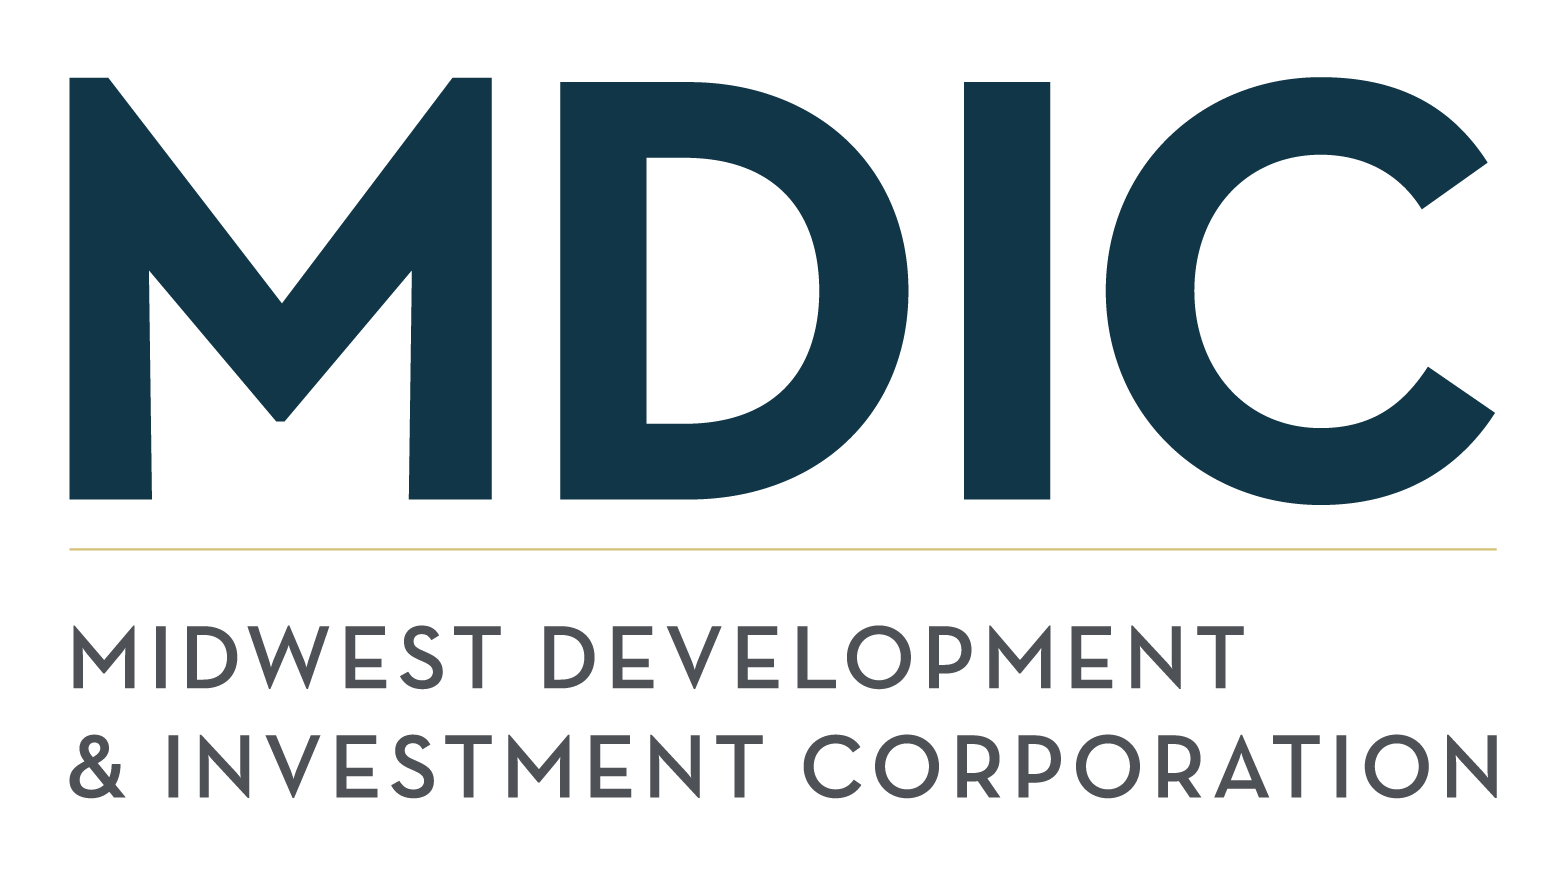 MDIC – Midwest Development & Investment Corporation